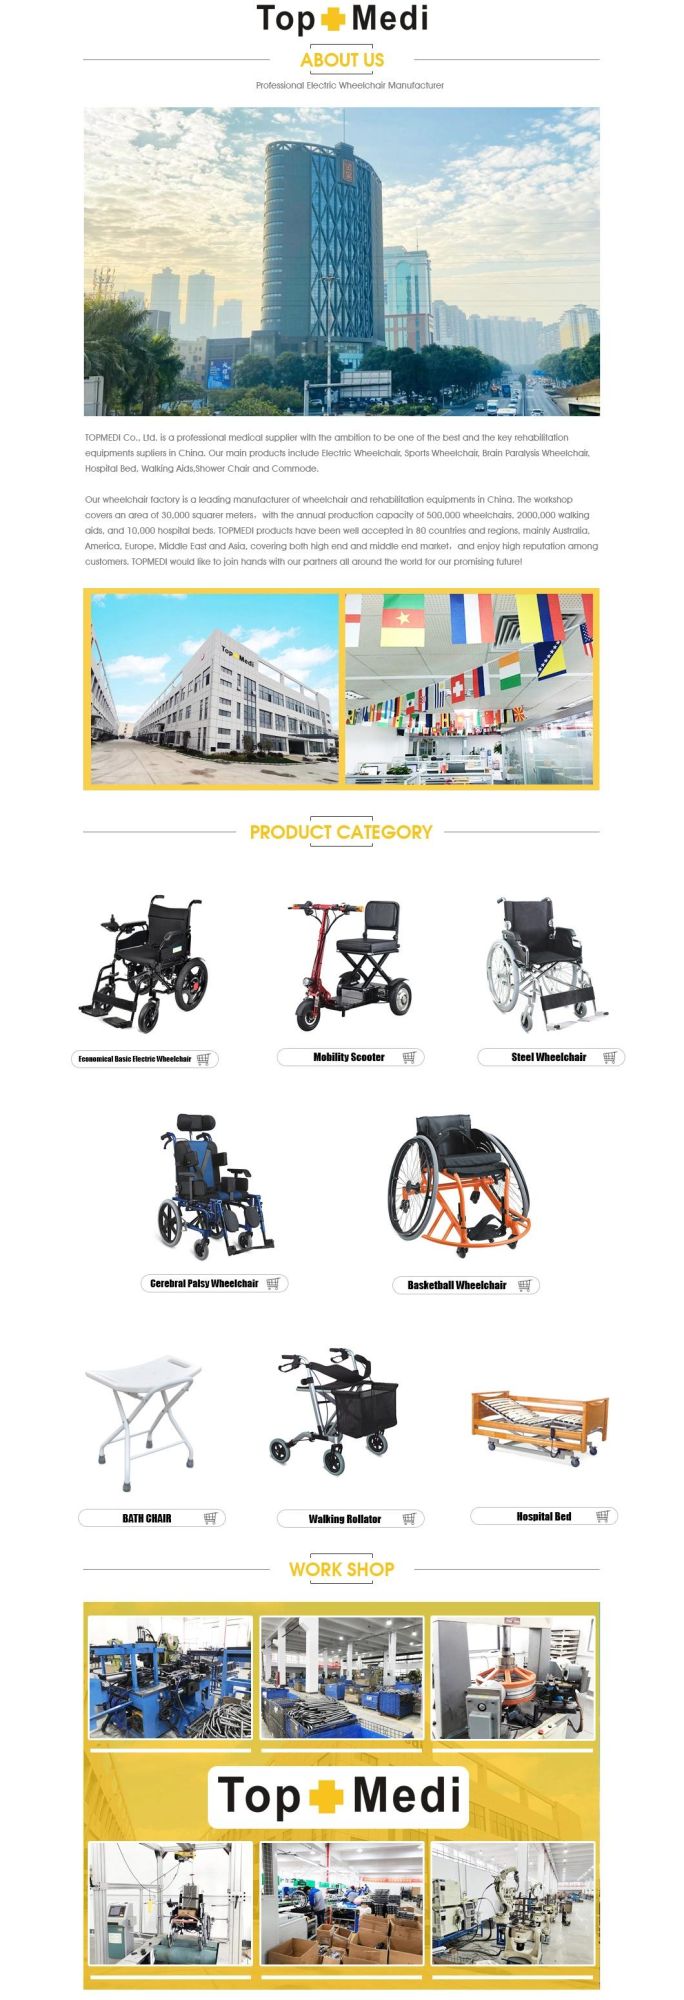 Cheap Transit Steel Wheelchair with Chromed Steel Frame